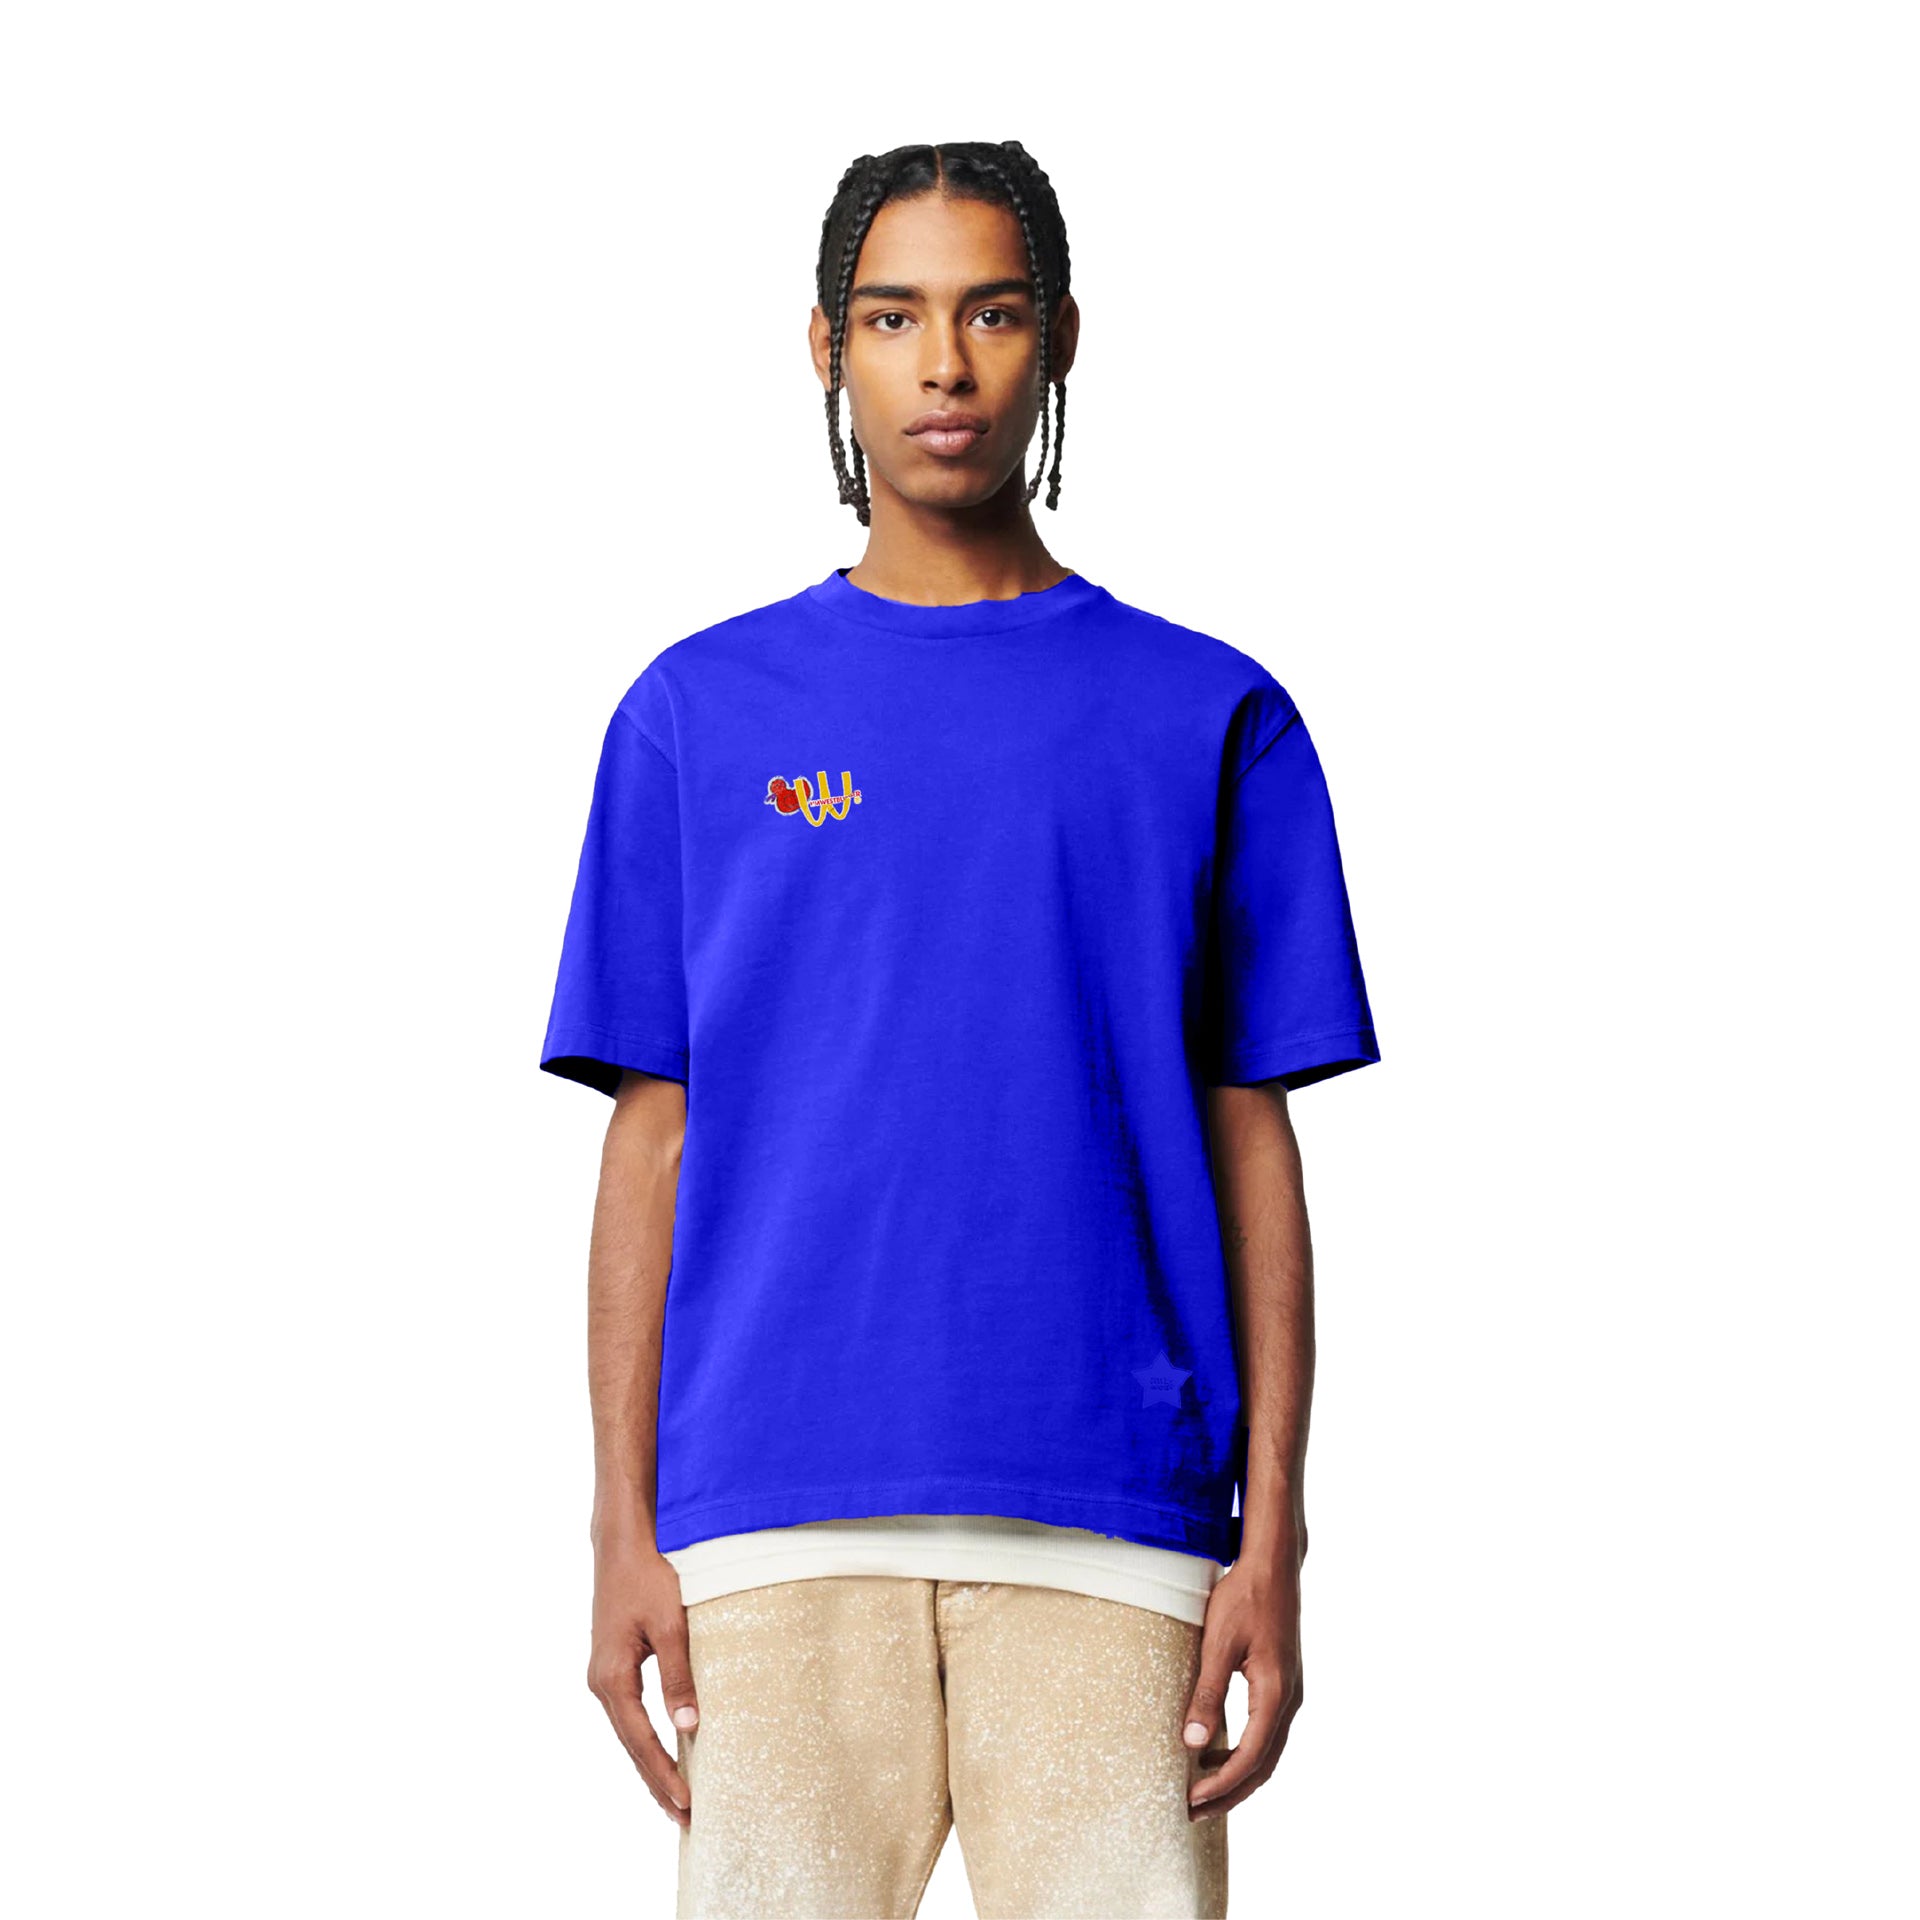 Blue T-shirt From I'm West